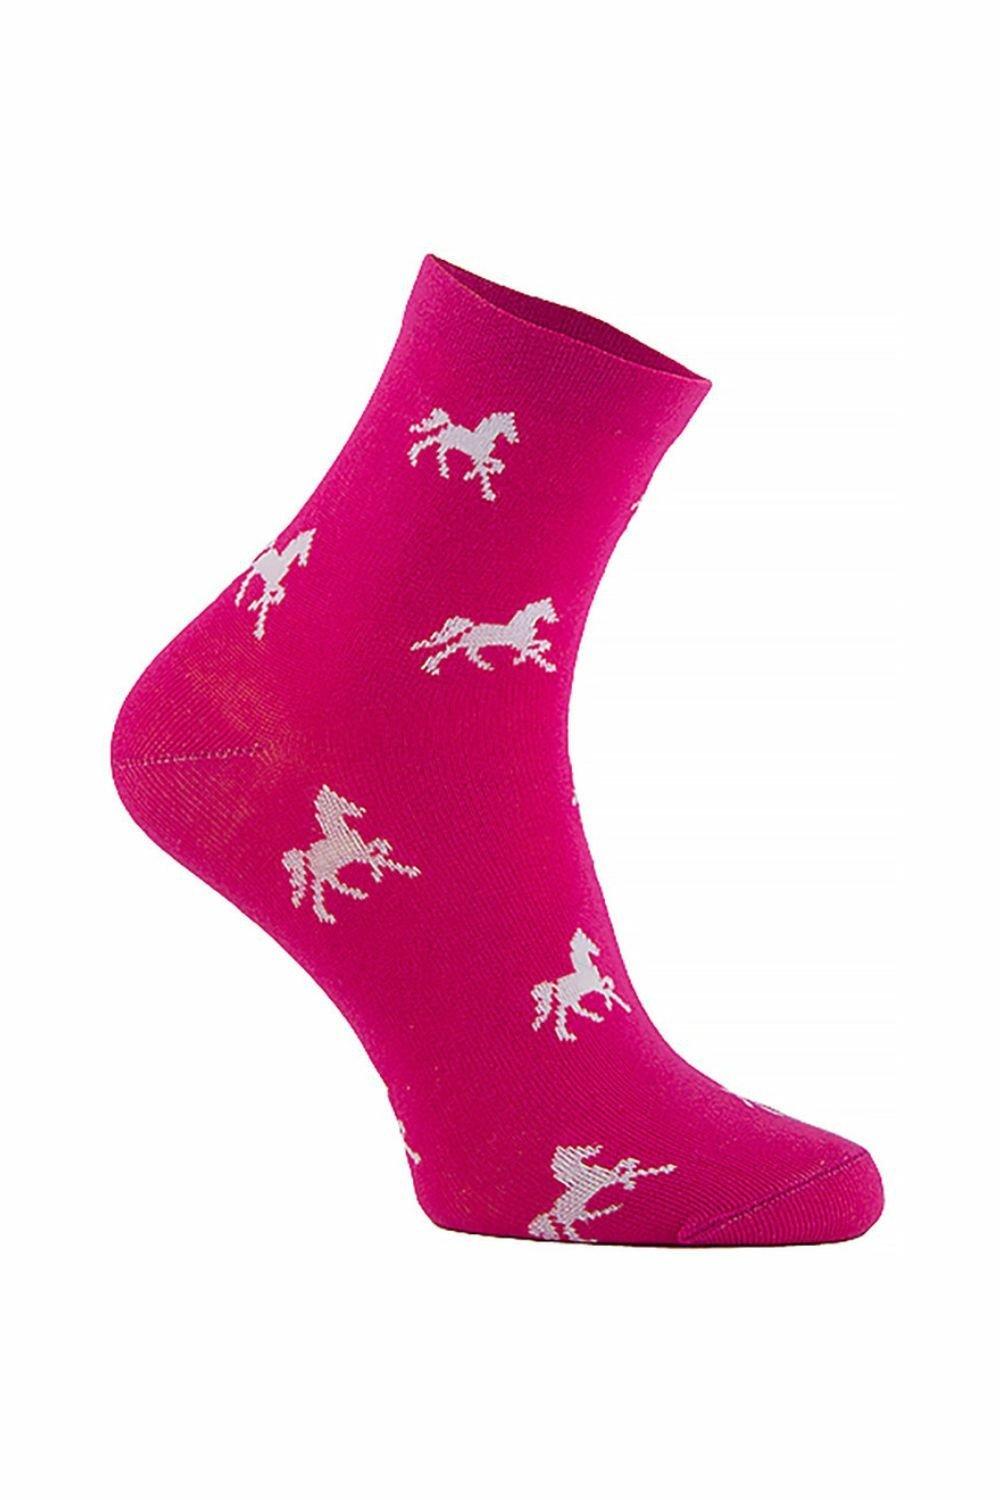 Equestrian Low Cut Breathable Outdoor Horse Riding Socks